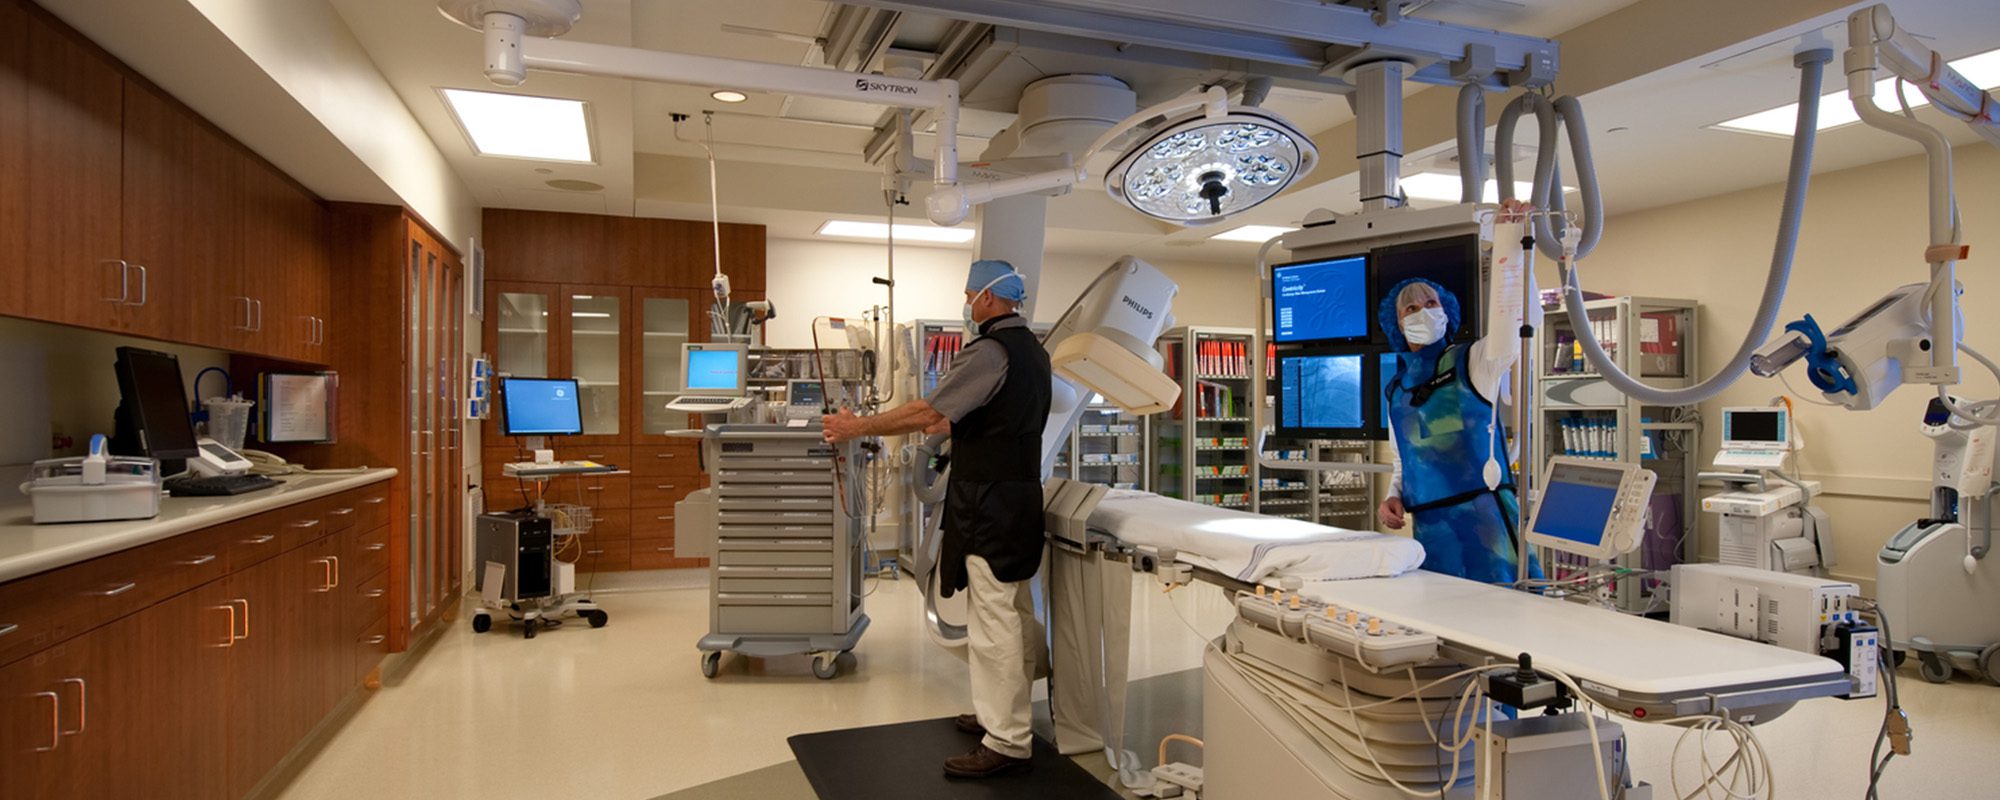 operating room with two healthcare professionals